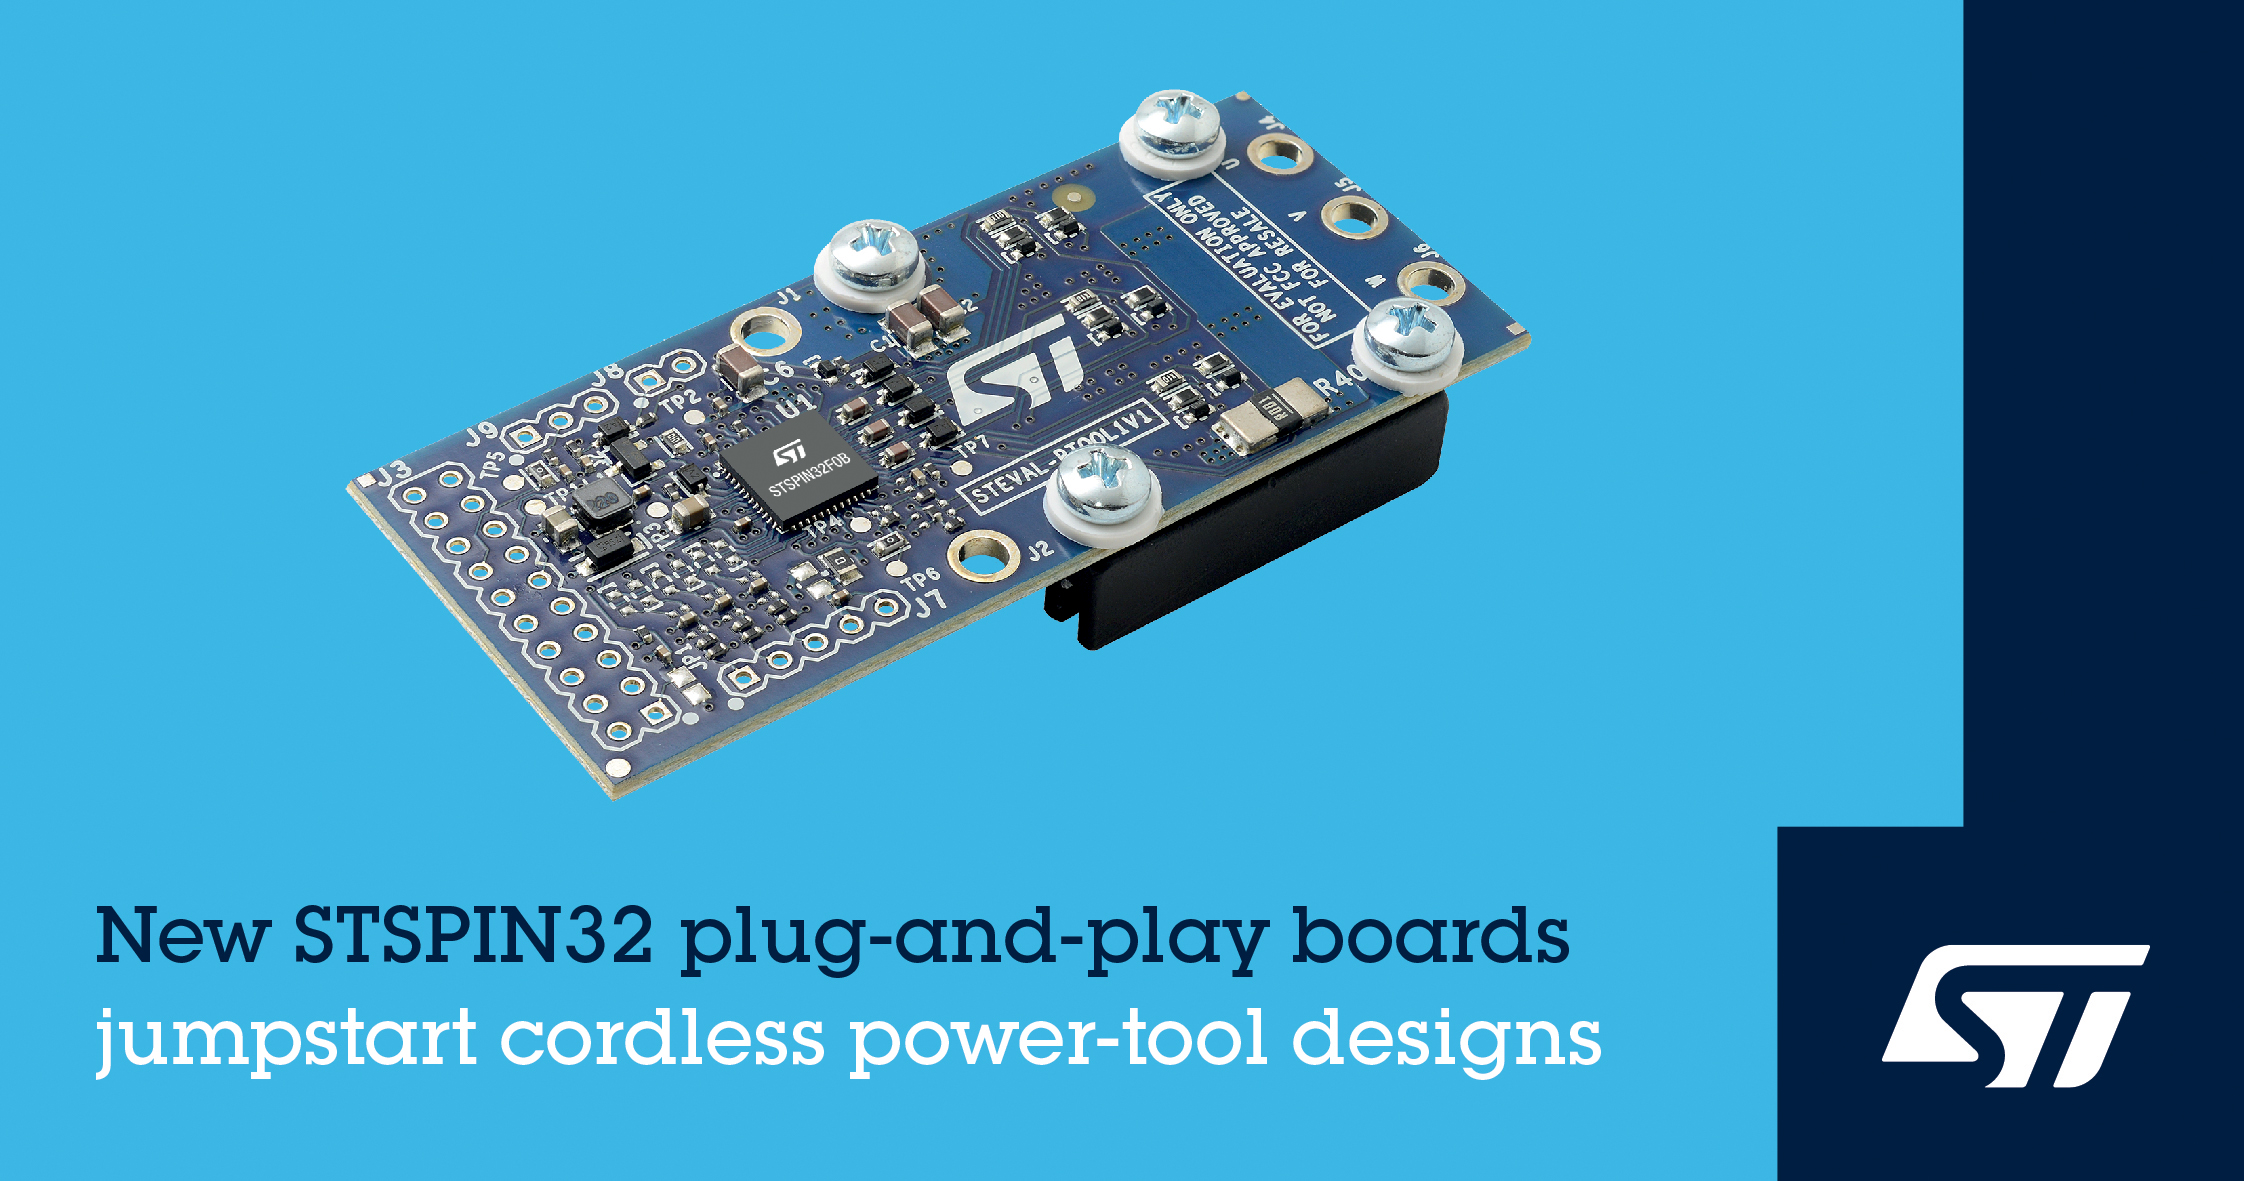 STMicroelectronics Simplifies Development of Cordless Power Tools with Plug-and-Play STSPIN32 Prototype Boards